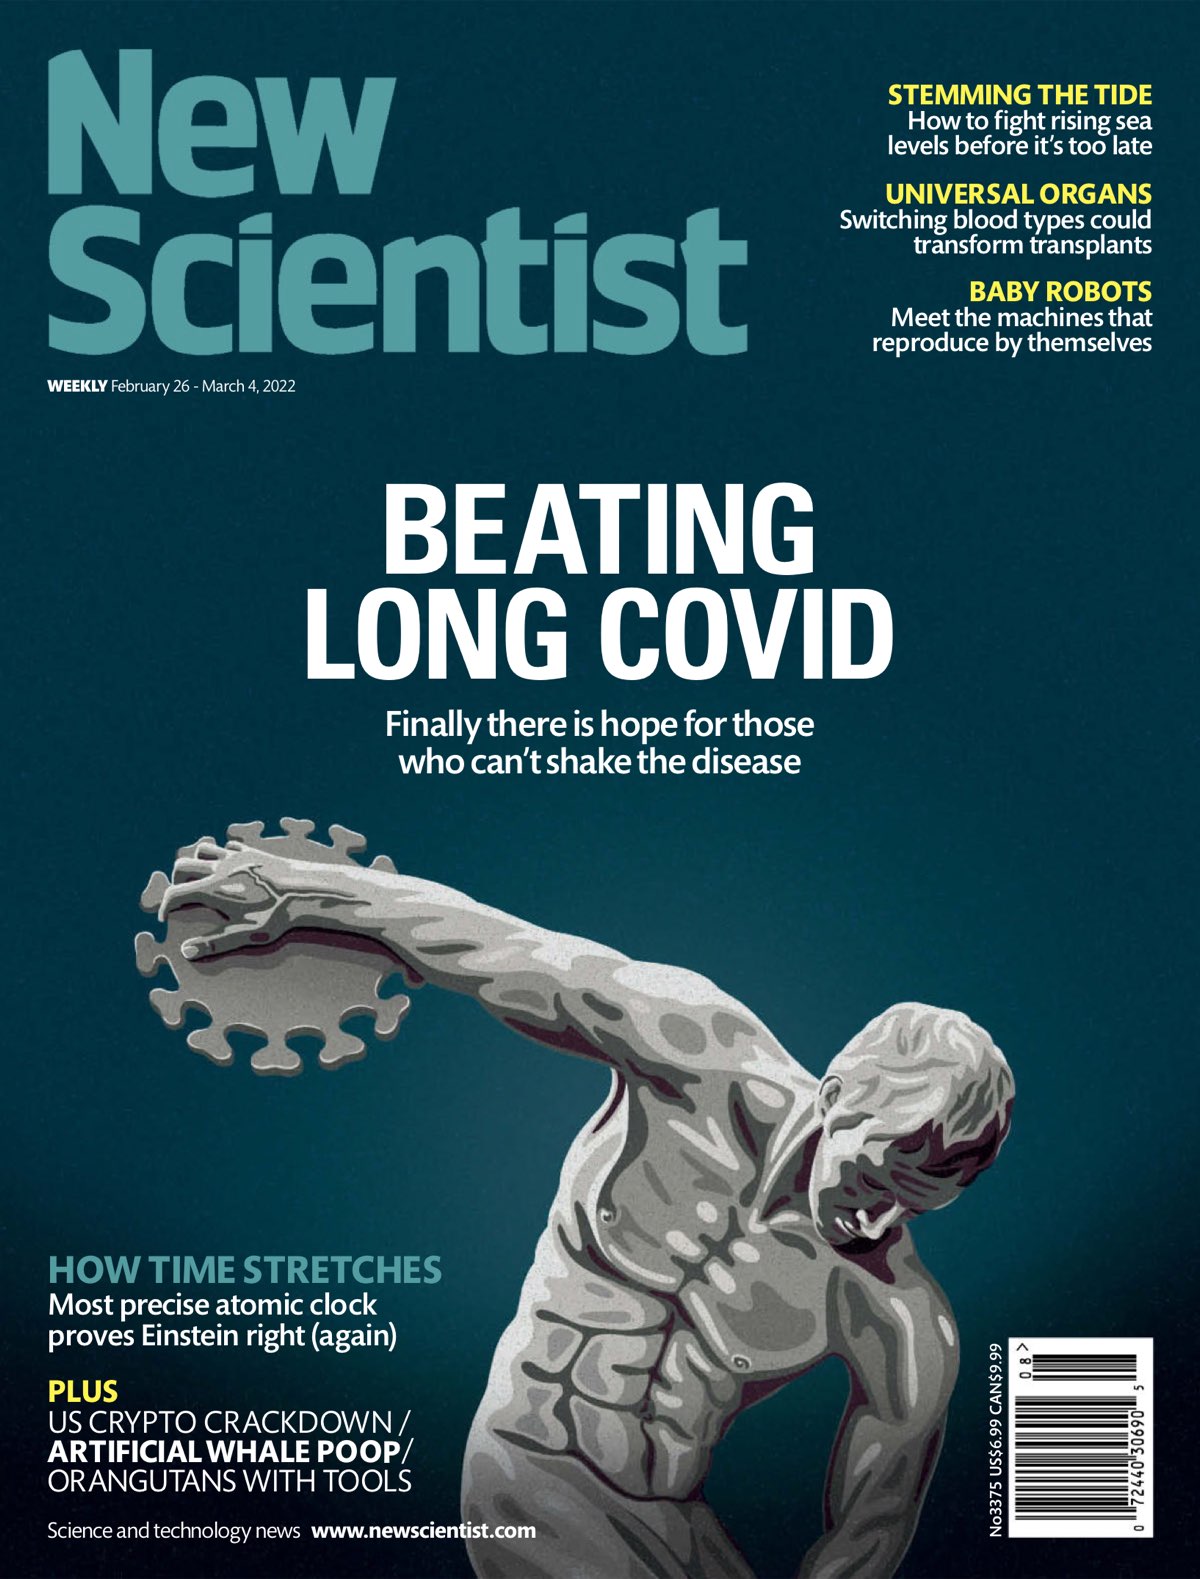 New Scientist - Issue 3375 26 Feb 2022